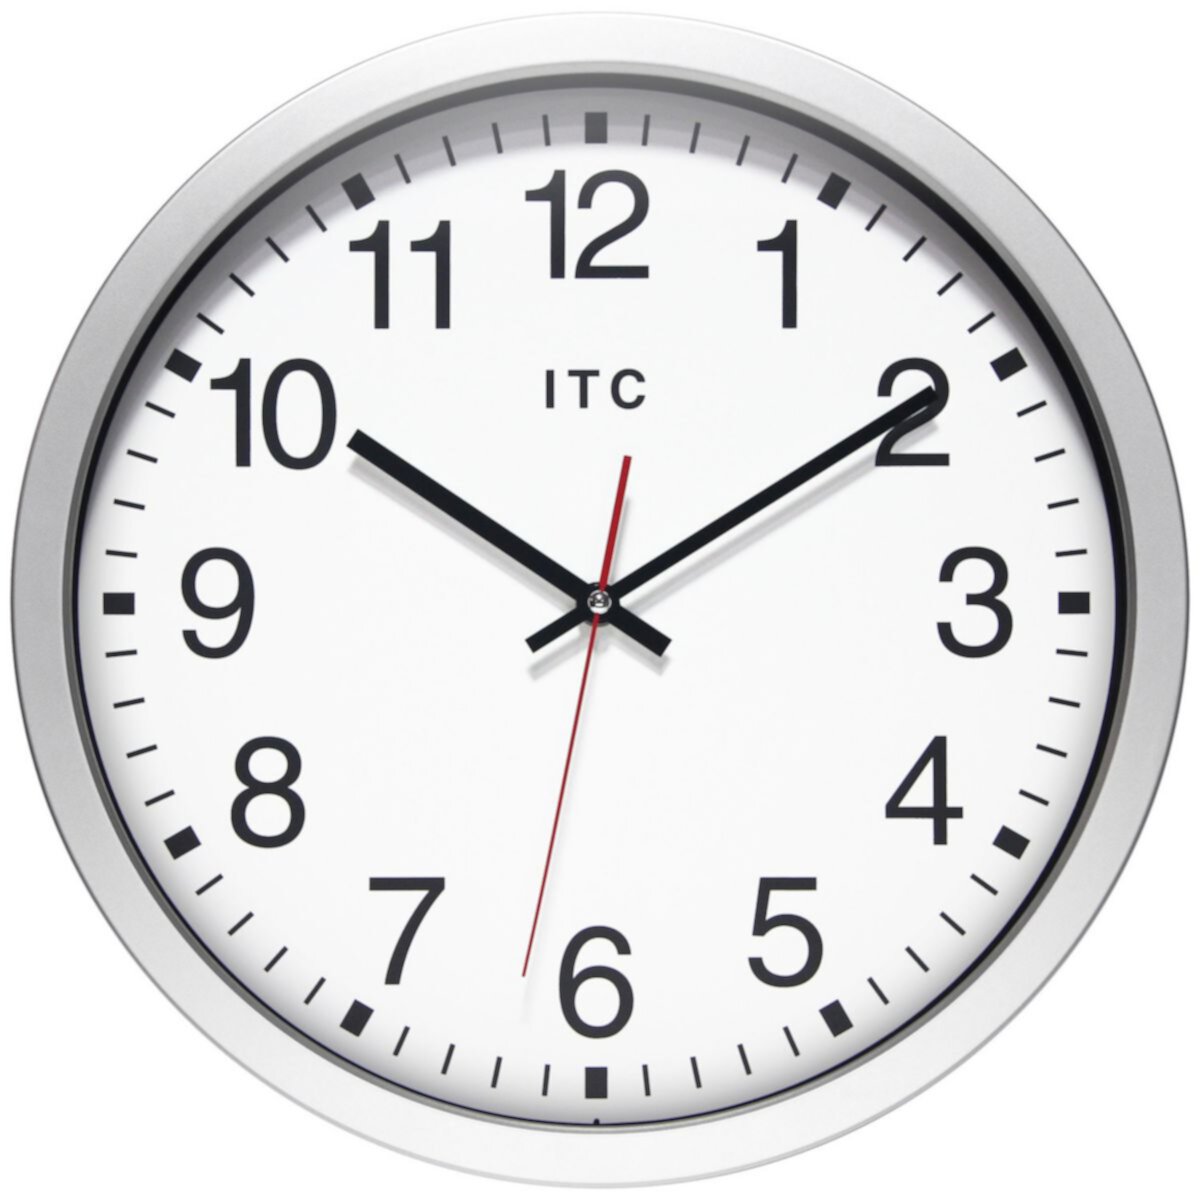 Infinity Instruments 14-in. Round Wall Clock with Silent Movement Infinity Instruments